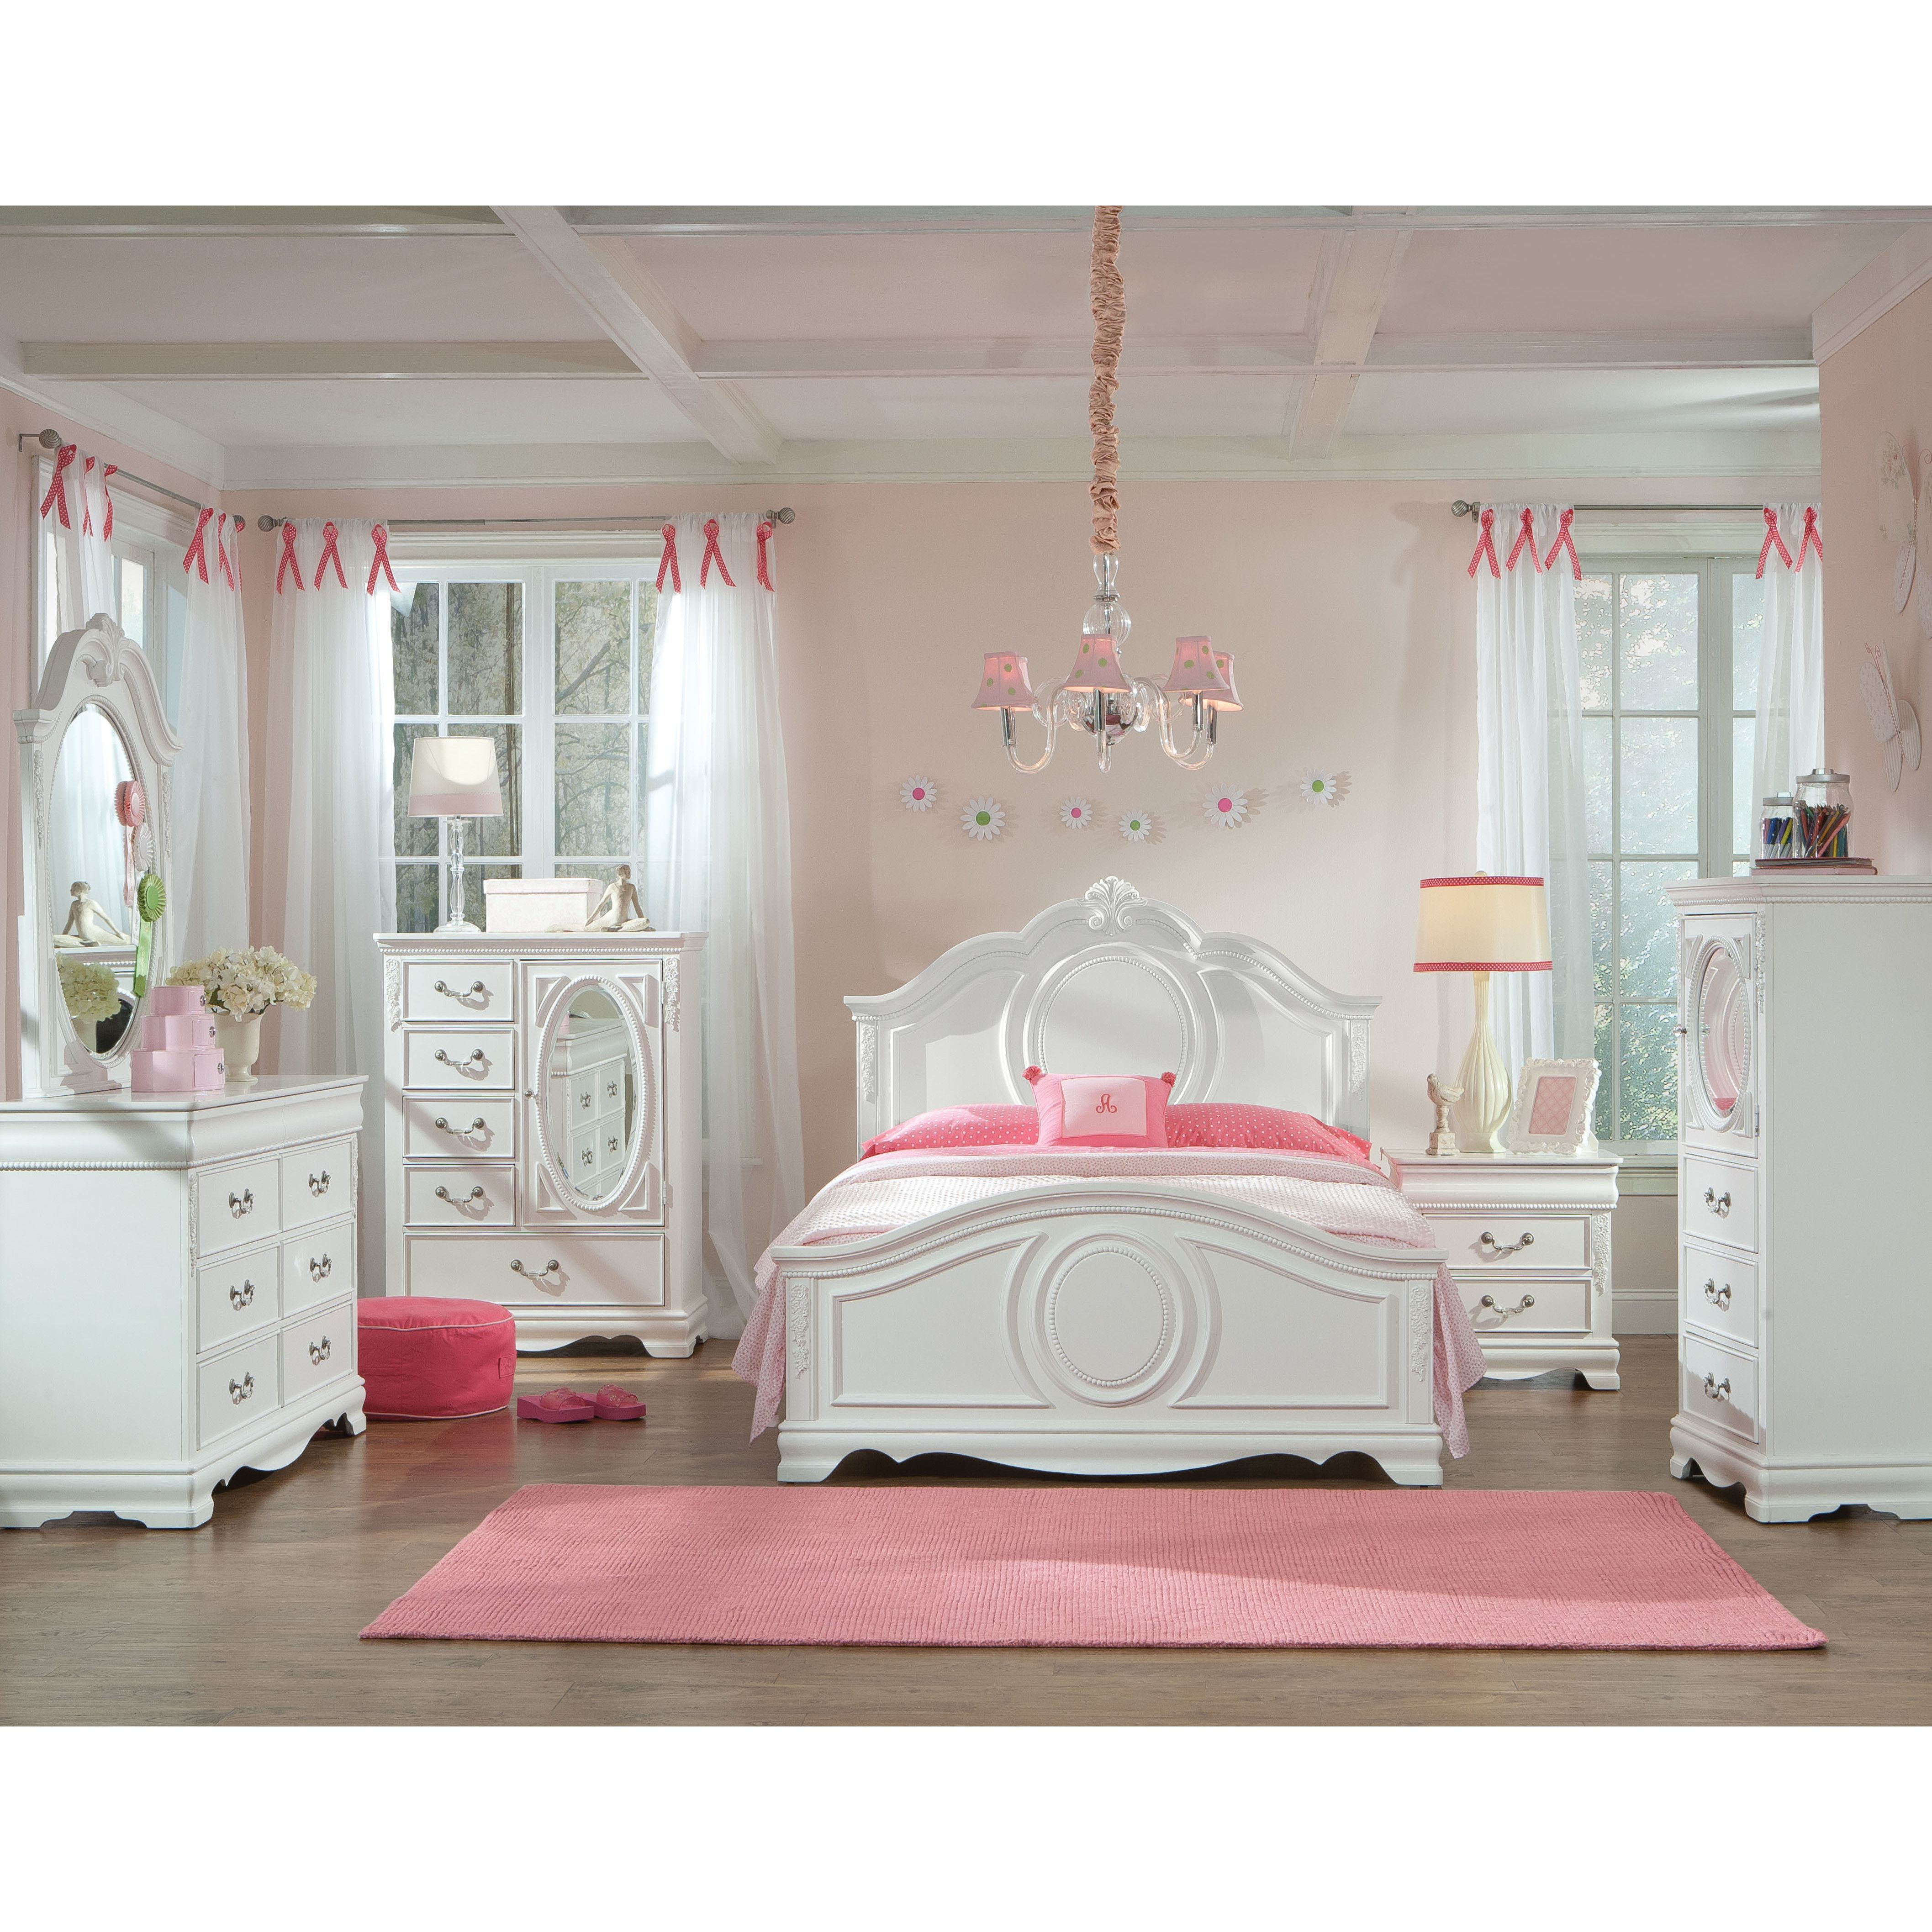 Incredible Brilliant Full Bedroom Sets For Girls Learning in dimensions 4230 X 4230